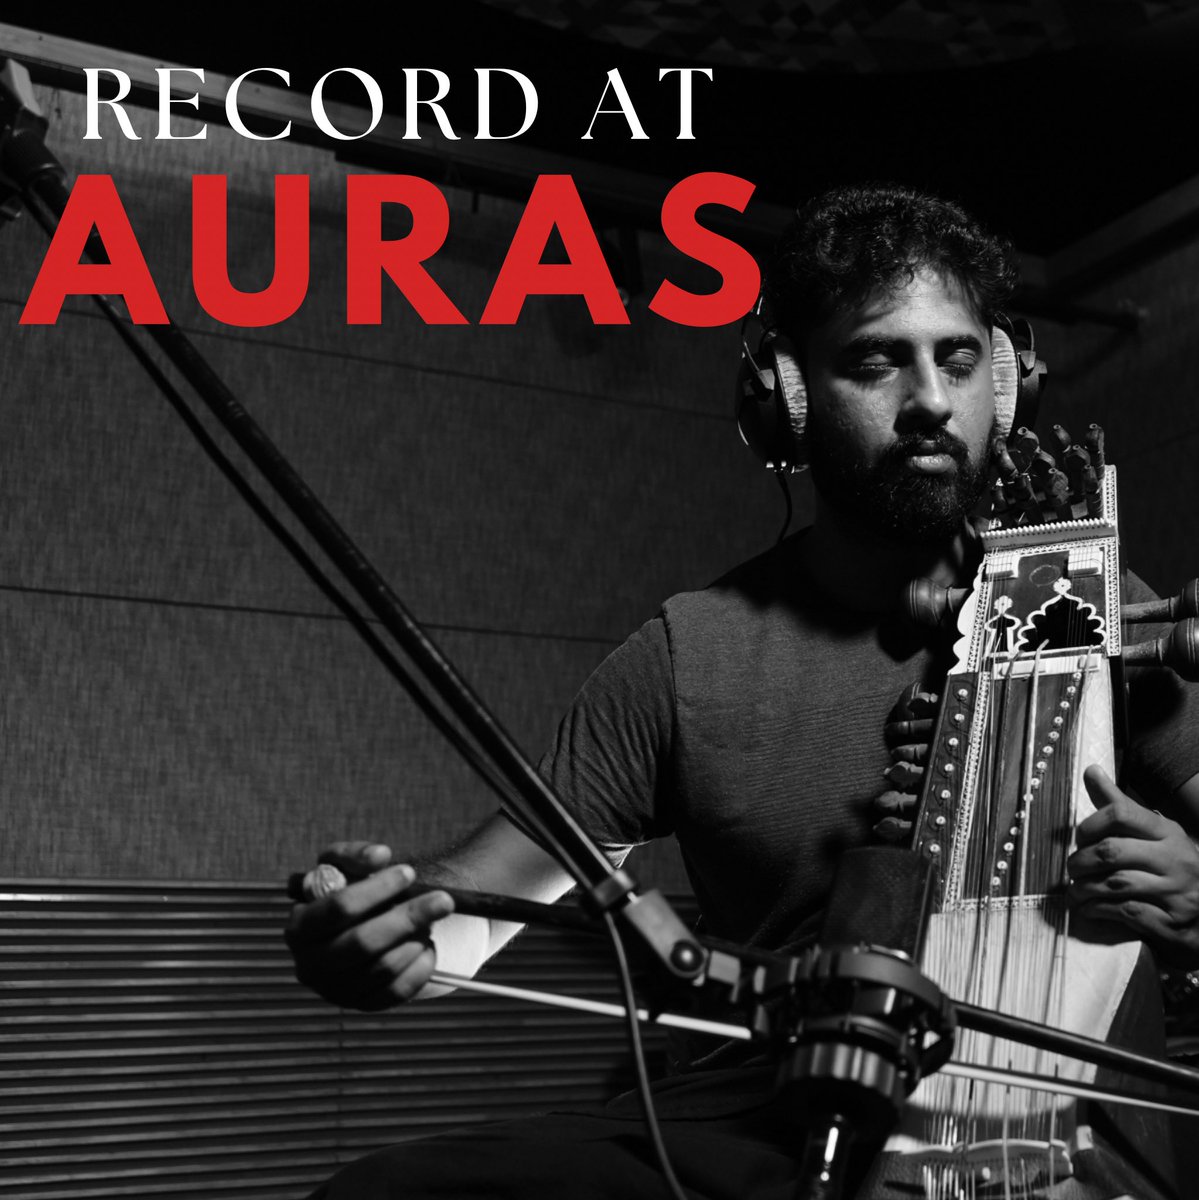 RECORD AT AURAS
Book your slot with us 
Contact now : +91 9899808800 
#insyncwithsound
#aurasaudio 

#recordatauras 
#recordmusic 
#learnmusic 
#recordingstudios 
#recordingmusic 
#recordingstudiodelhi
#delhirecordingstudio
#bestrecordingstudiodelhi
#aurasaudiostudio
#aurasstudio